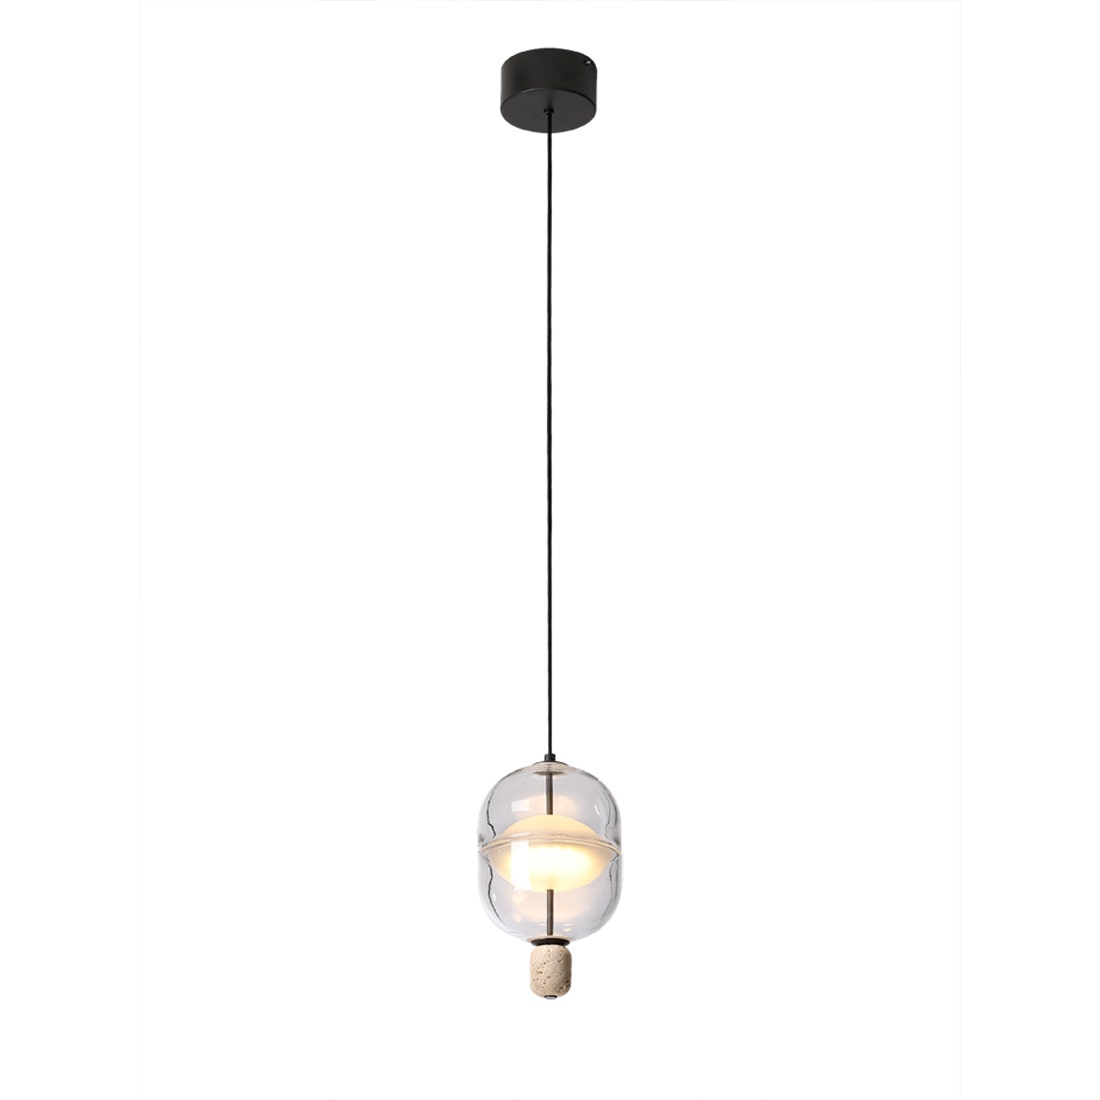 LL PENDENT LAMP#MD21940-1-170A/GLASS/MDL สีใส01